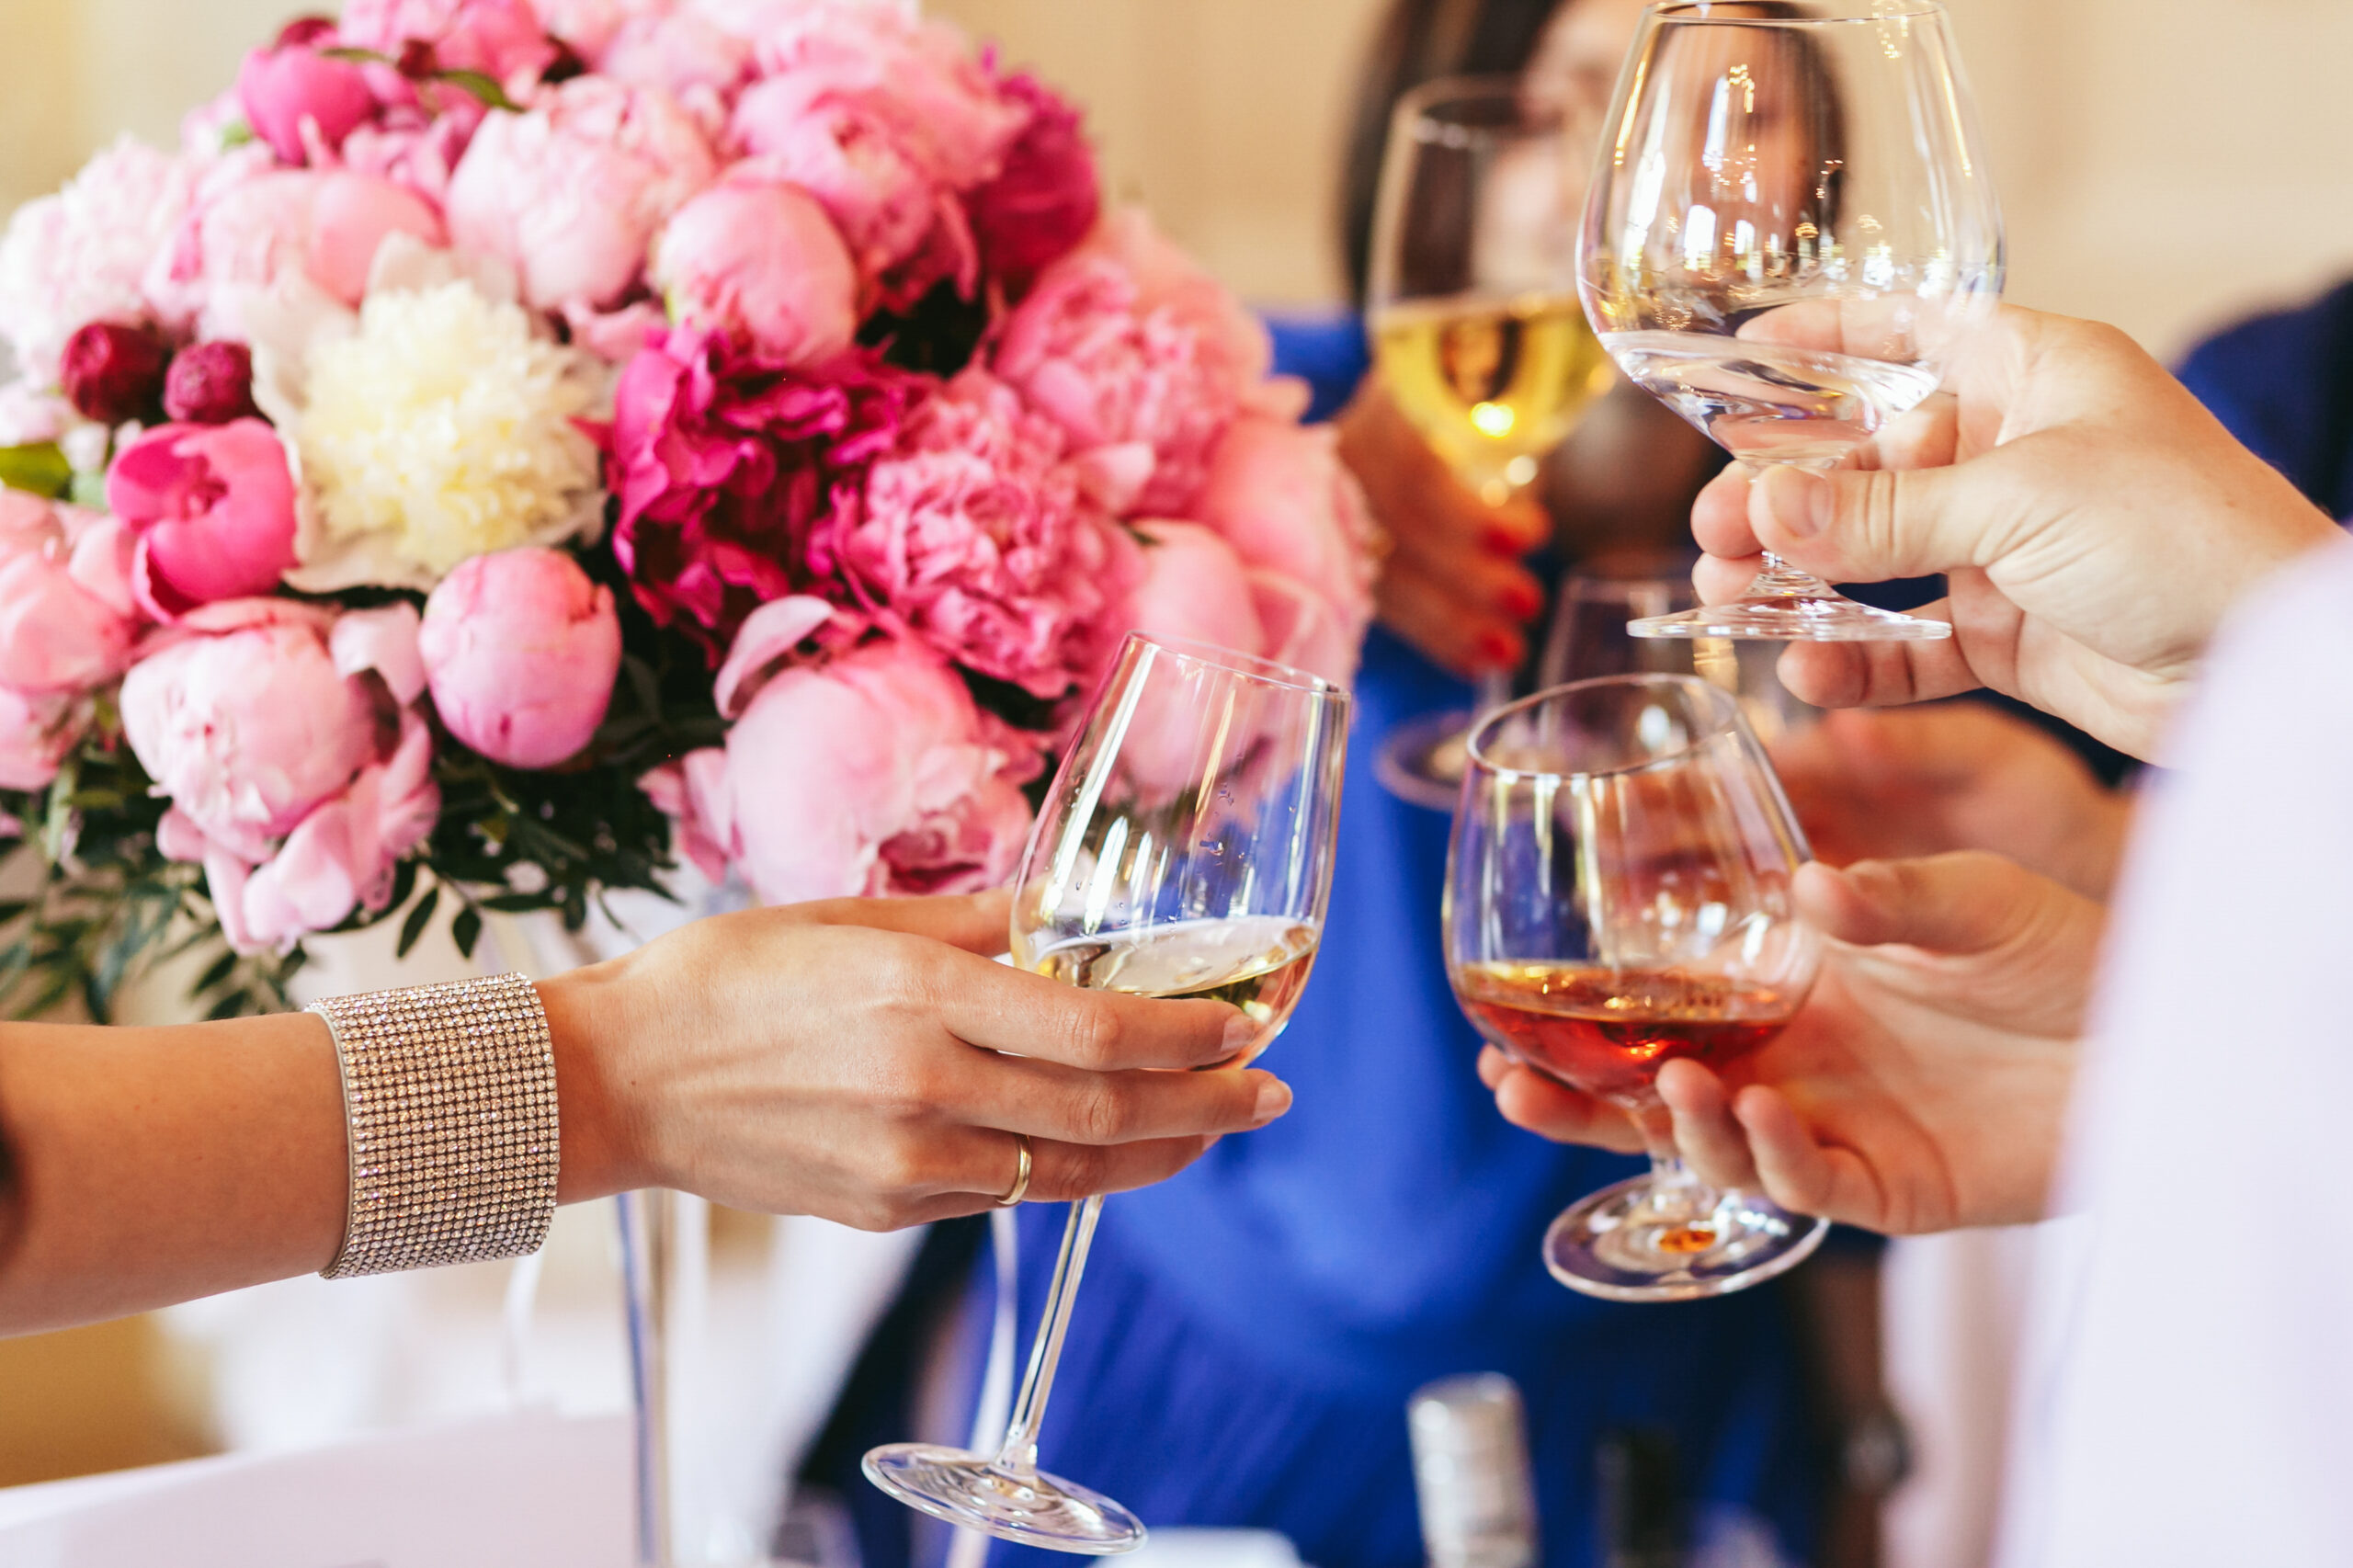 Guests clang glasses of champagne and whisky before a pink bouquet